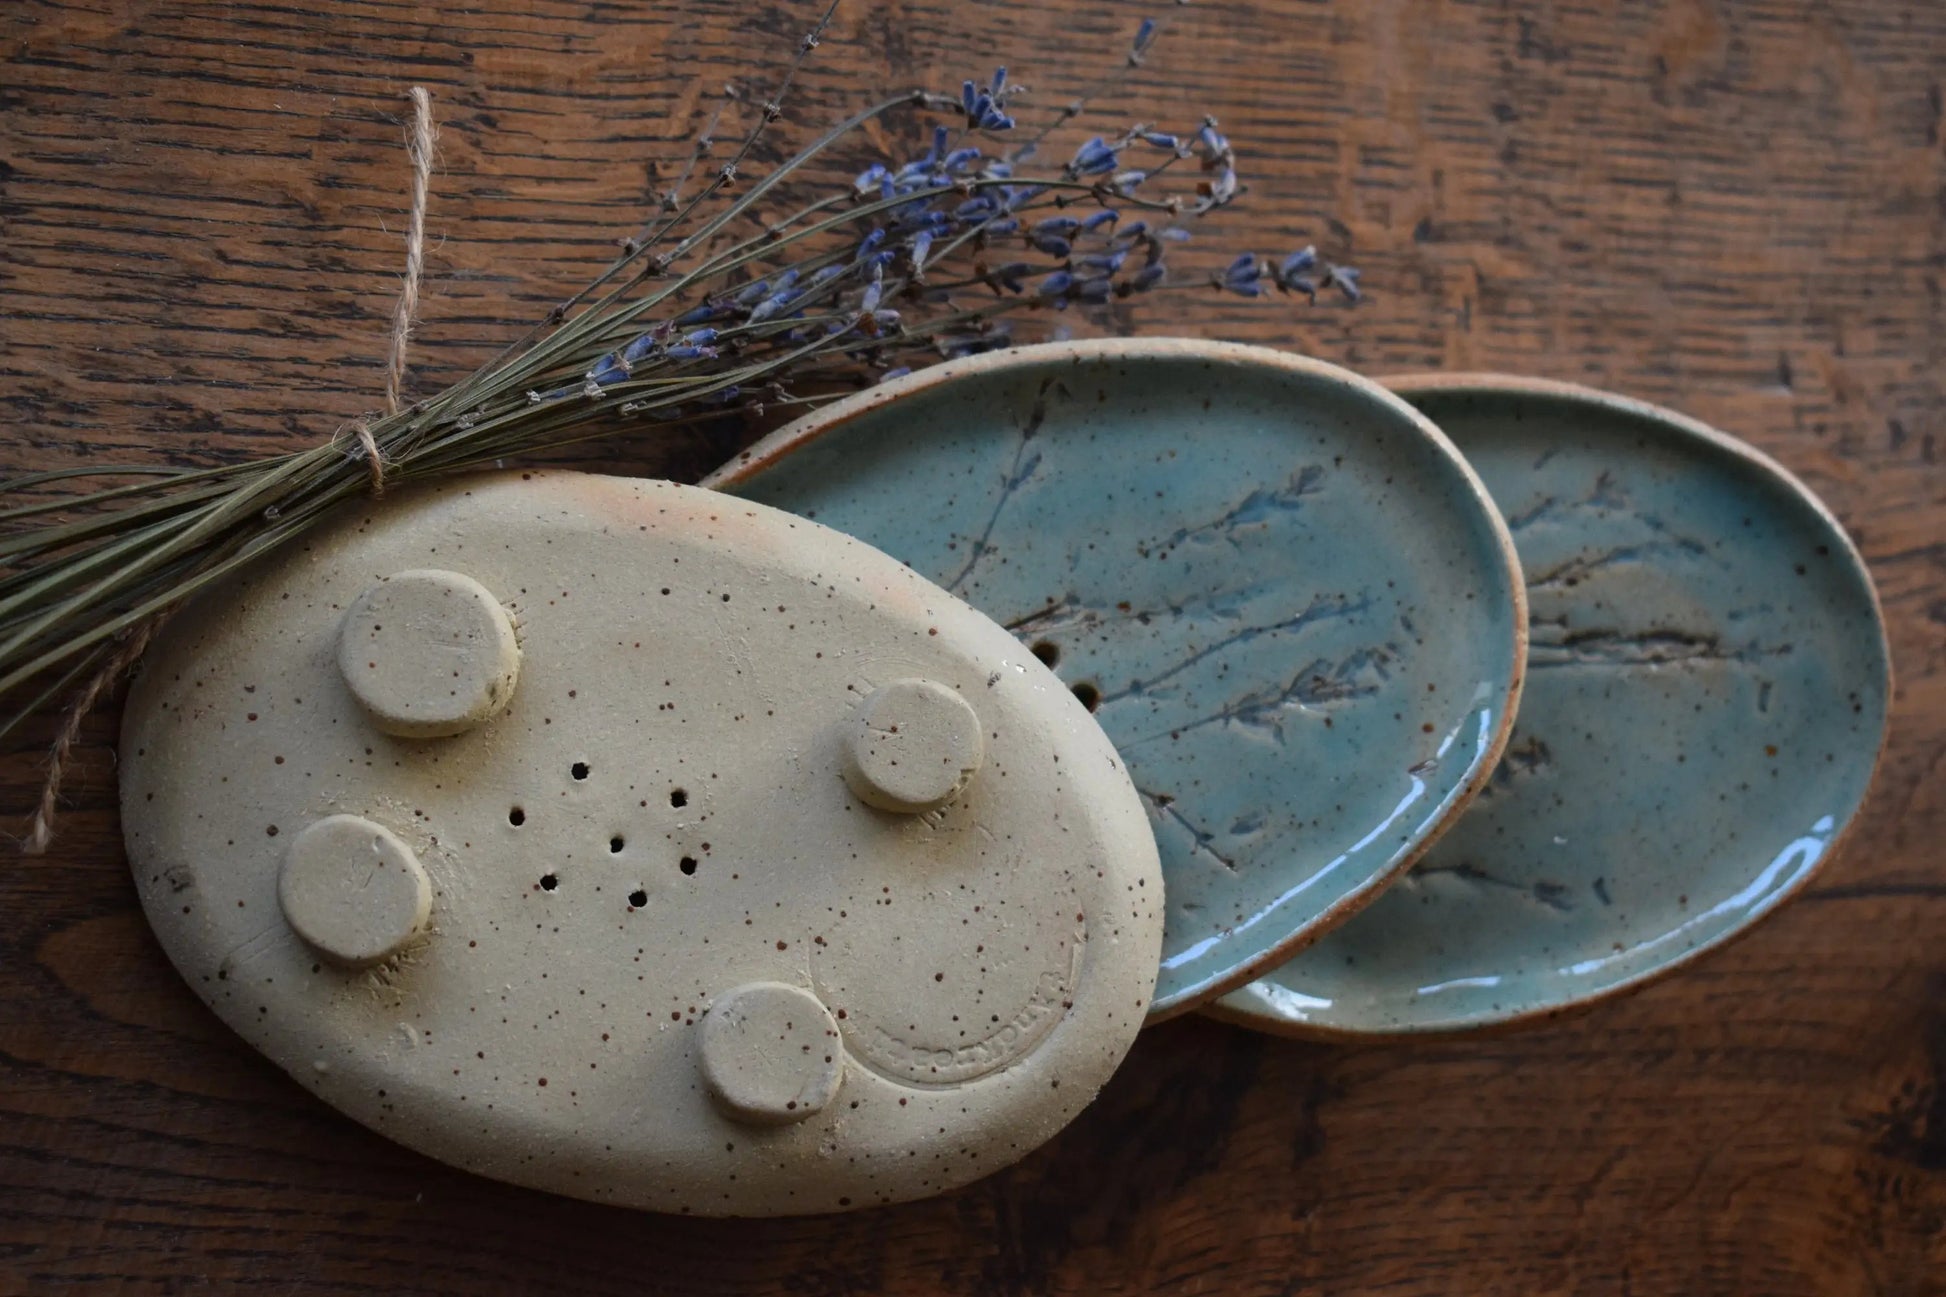 Handmade Ceramic Soap Dish with Hand-Pressed Blossoms